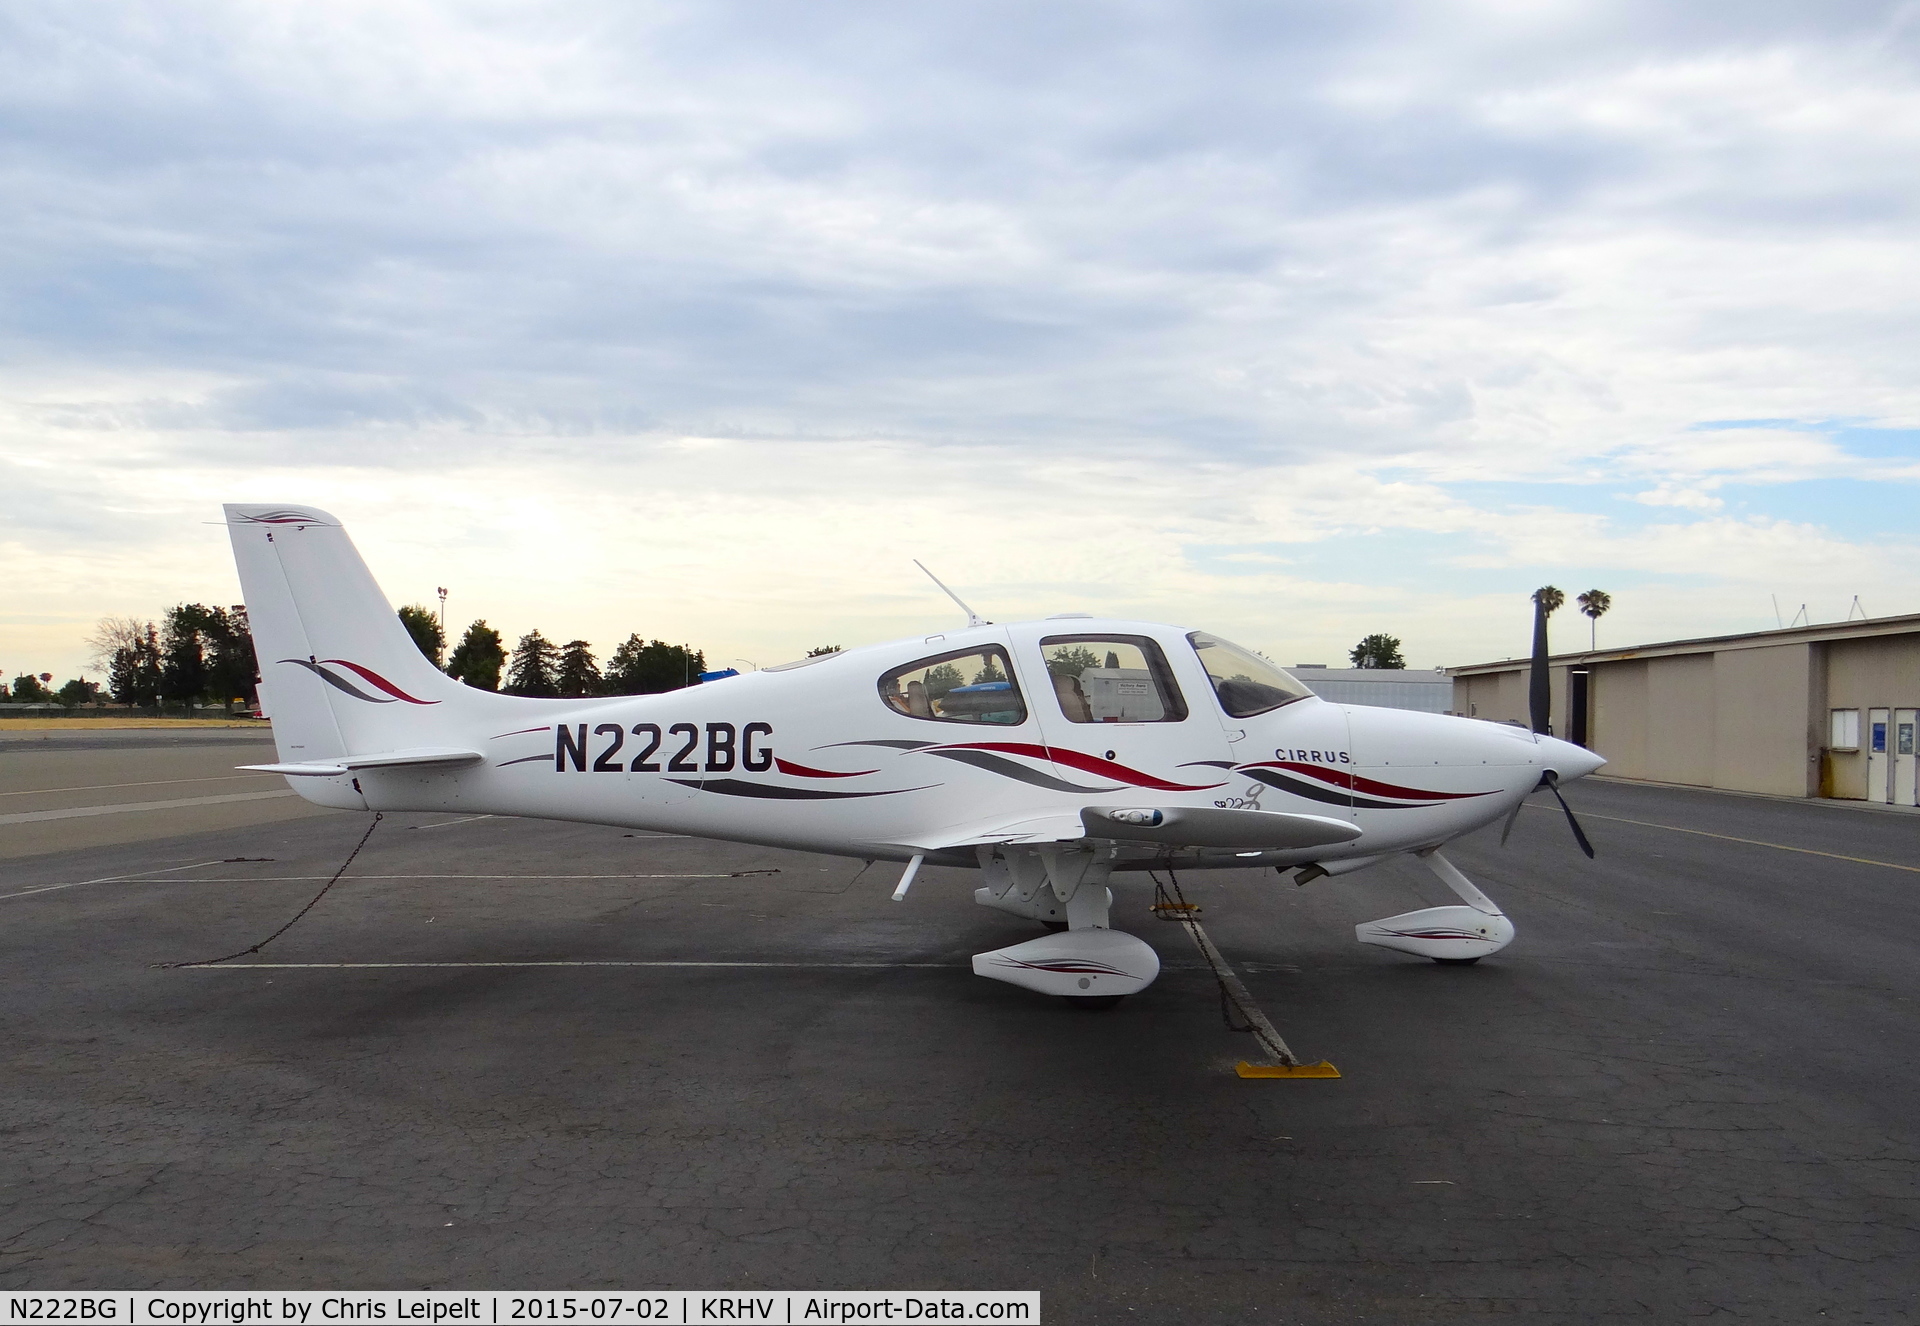 N222BG, 2004 Cirrus SR22T C/N 1095, Nevada-based 2004 Cirrus SR-22T visiting parked on the Nice Air tie downs at Reid Hillview Airport, San Jose, CA.